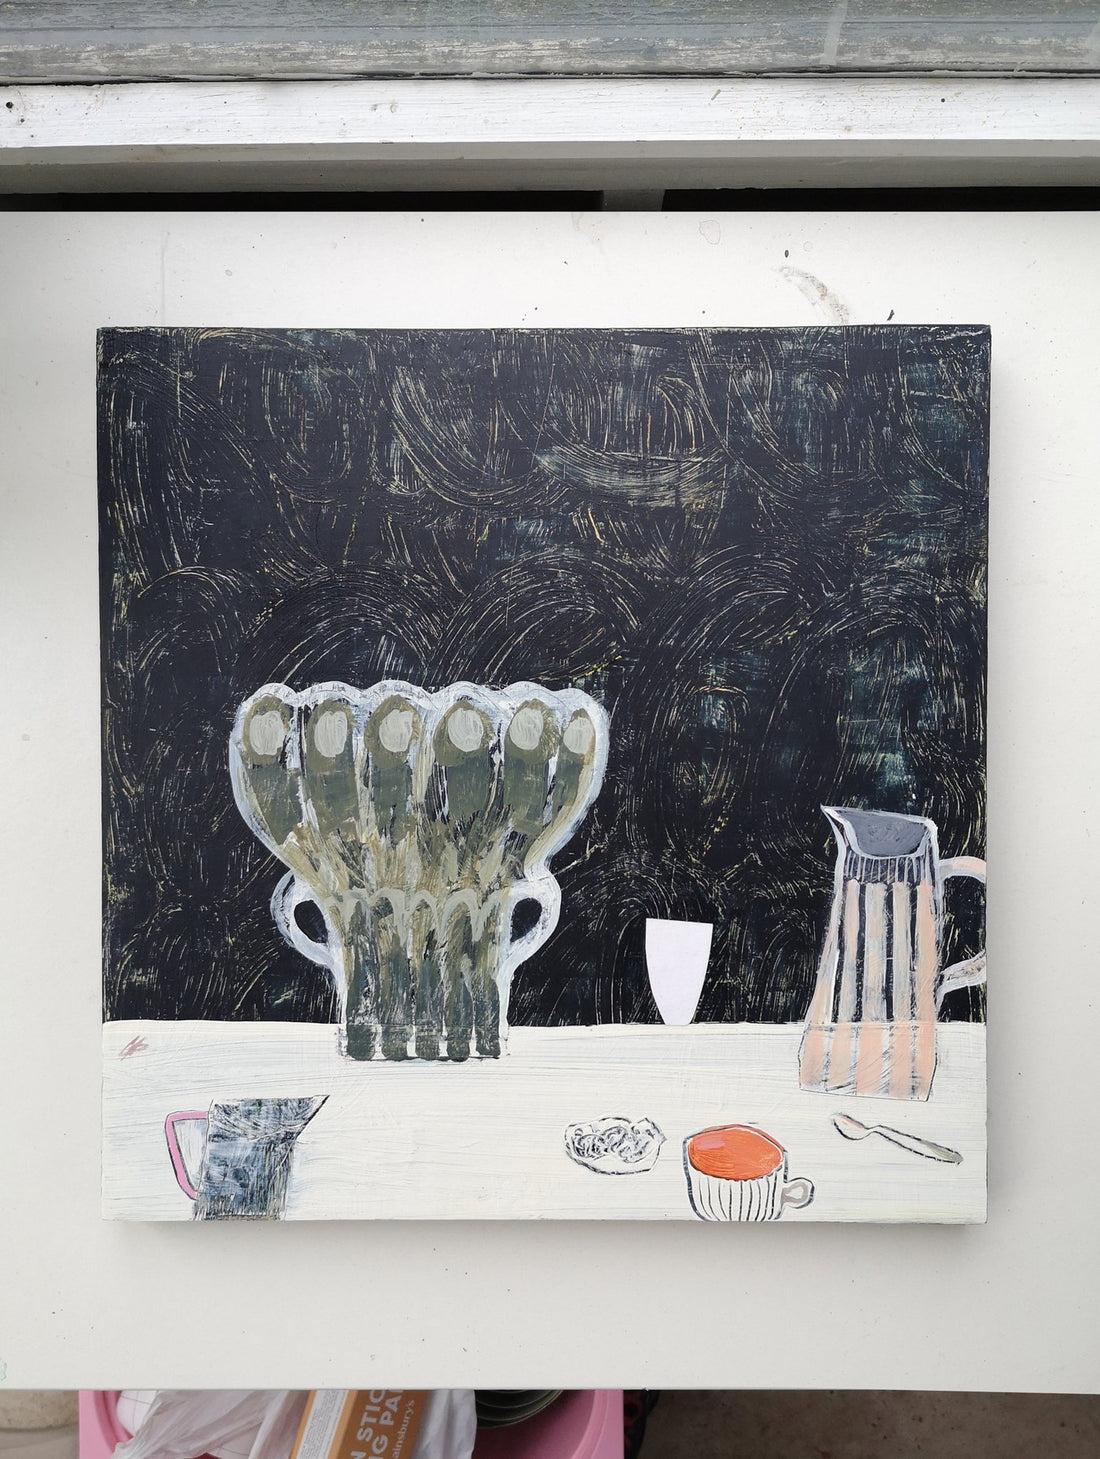 A new painting from the Self Paced Experimental Still Life course coming soon - Gabriella Buckingham